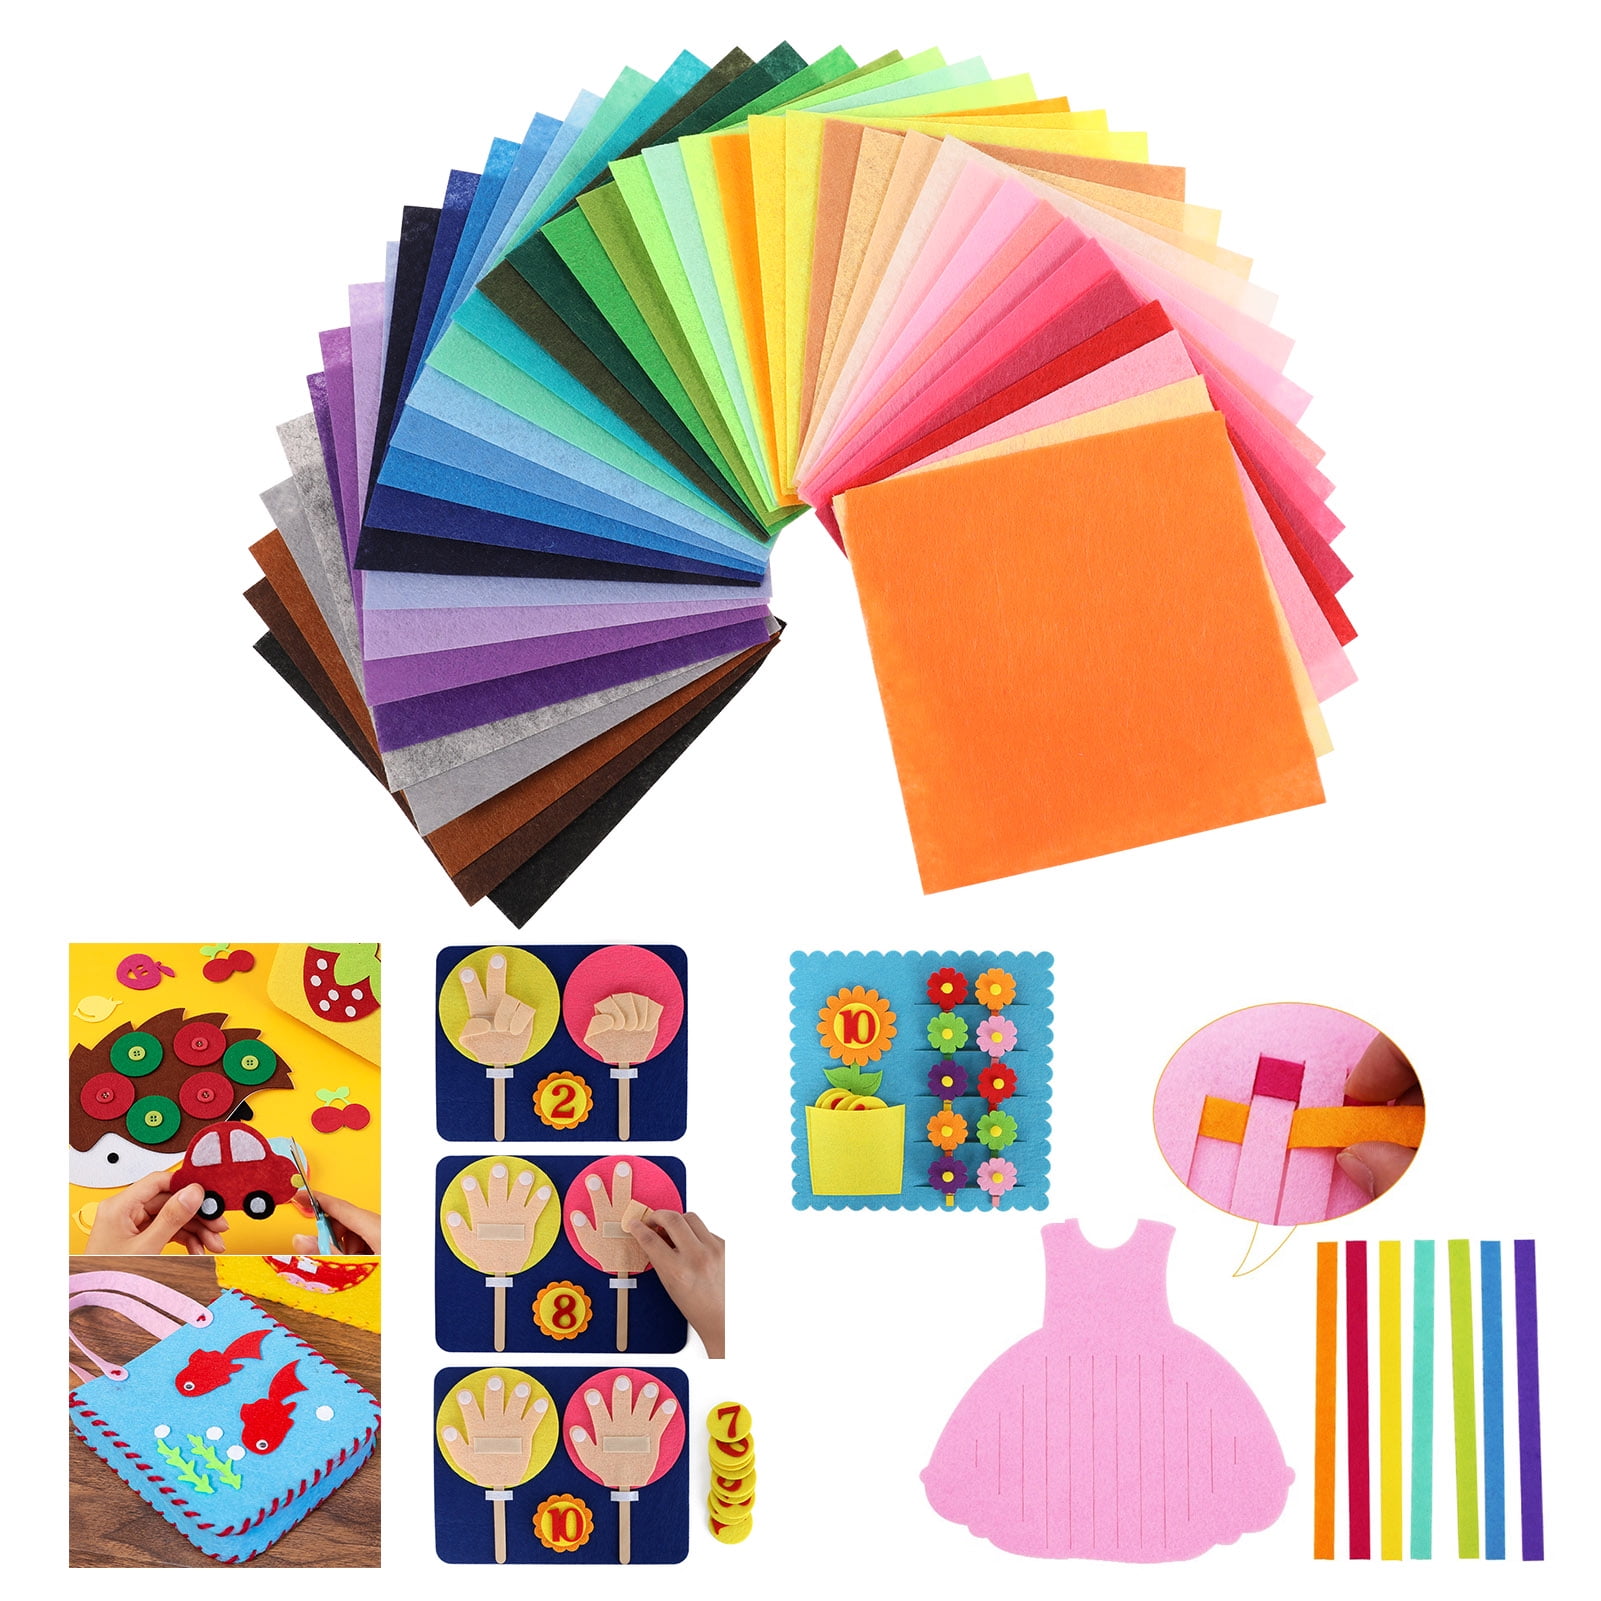 Set of 20Pcs Felt Sheets for Crafts Bulk Assorted Colors Thick Squares Felt  Fabric Sheets for Patchwork DIY Craft/Sewing/Arts & Crafts Projects